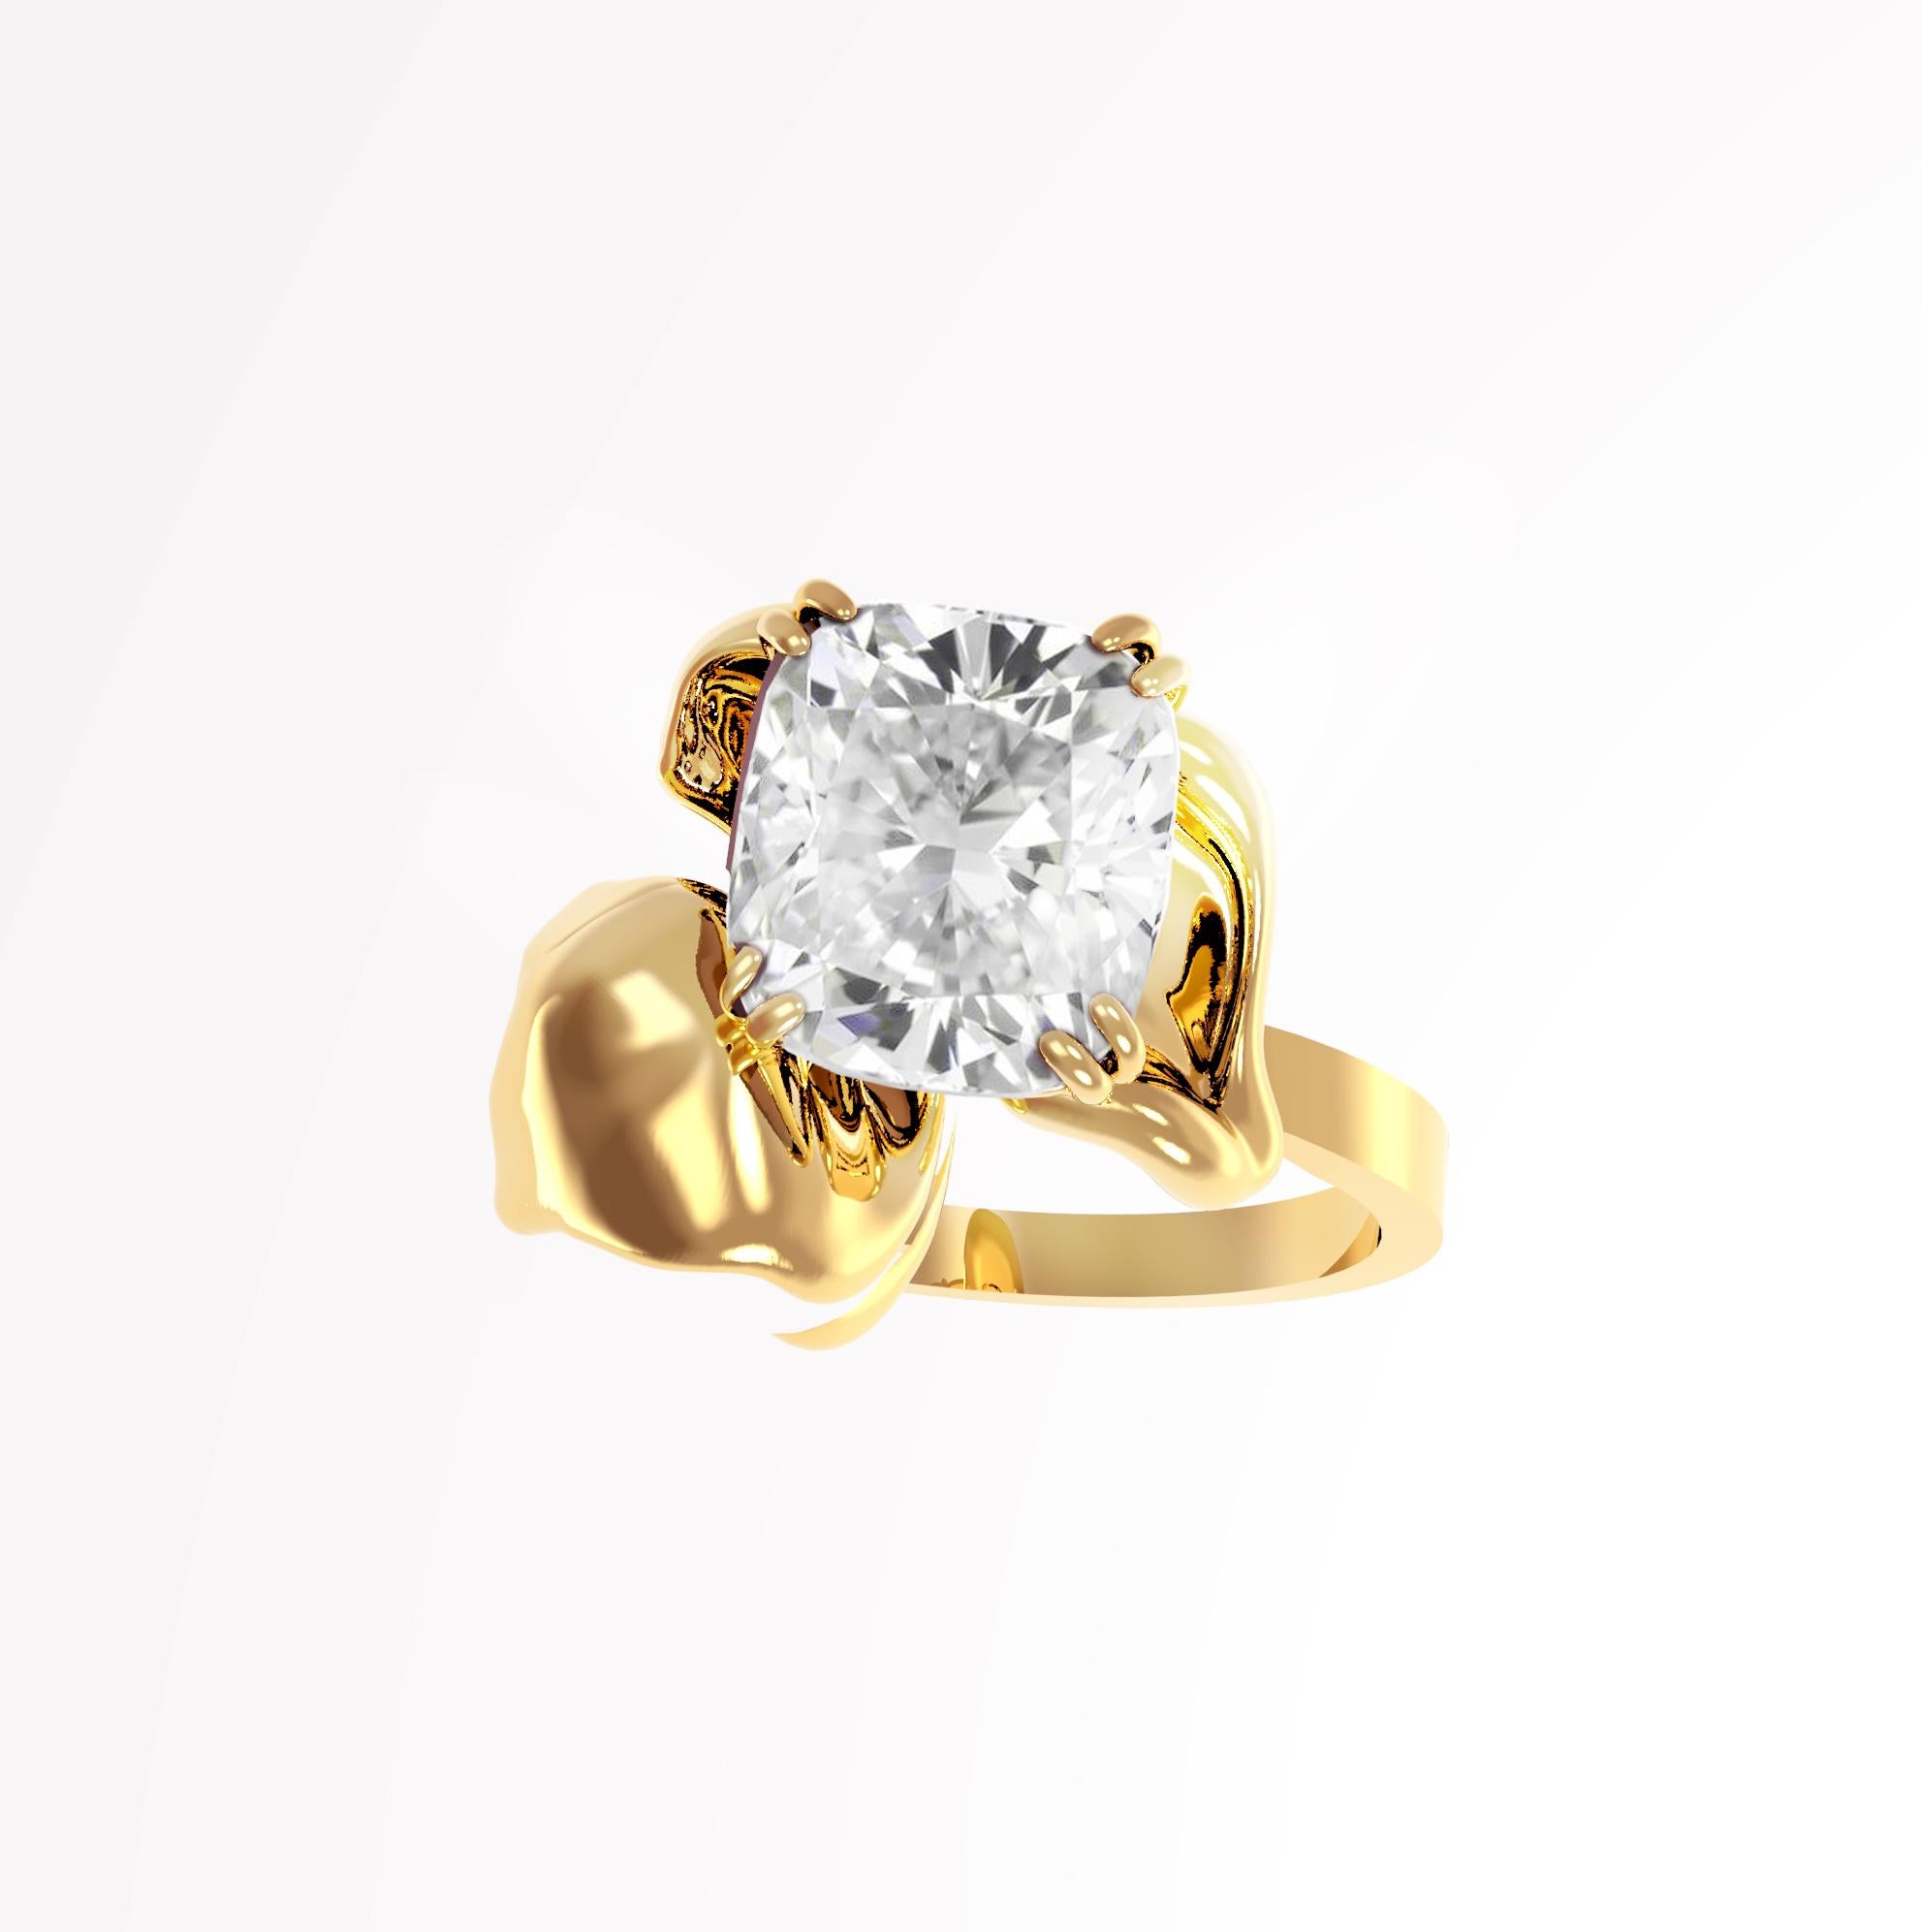 This contemporary Flower ring is crafted from 18-karat yellow gold with a cushion cut crushed ice diamond. The diamond weighs 1.01 carats, is SI1 clarity and F color. Designed by oil painter and 3D jewellery designer Polya Medvedeva, this ring is a